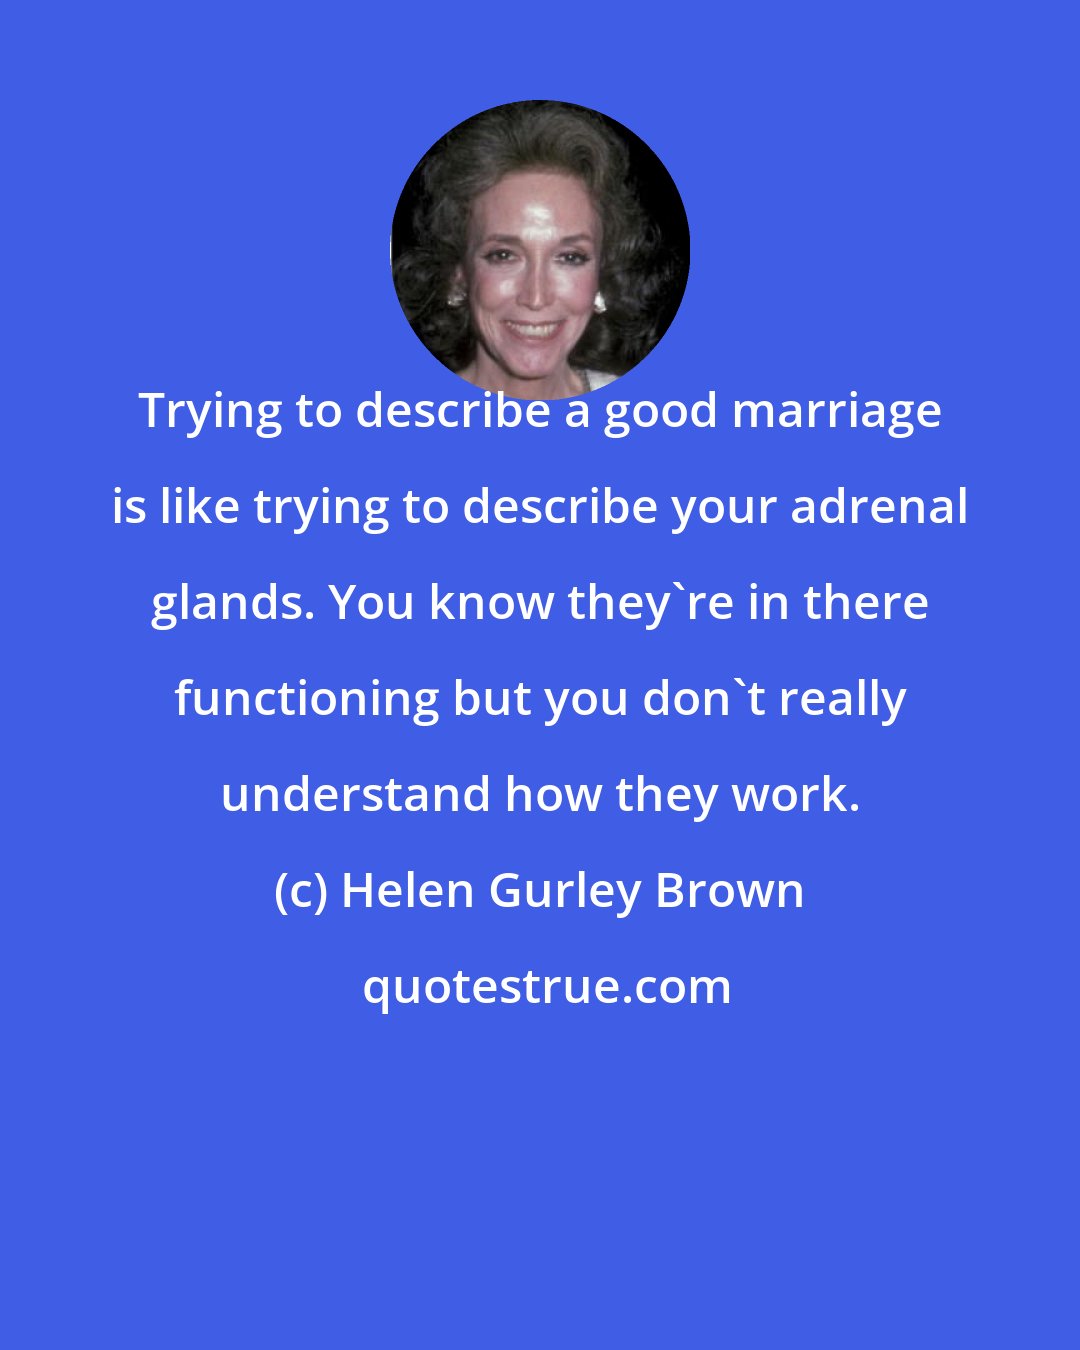 Helen Gurley Brown: Trying to describe a good marriage is like trying to describe your adrenal glands. You know they're in there functioning but you don't really understand how they work.